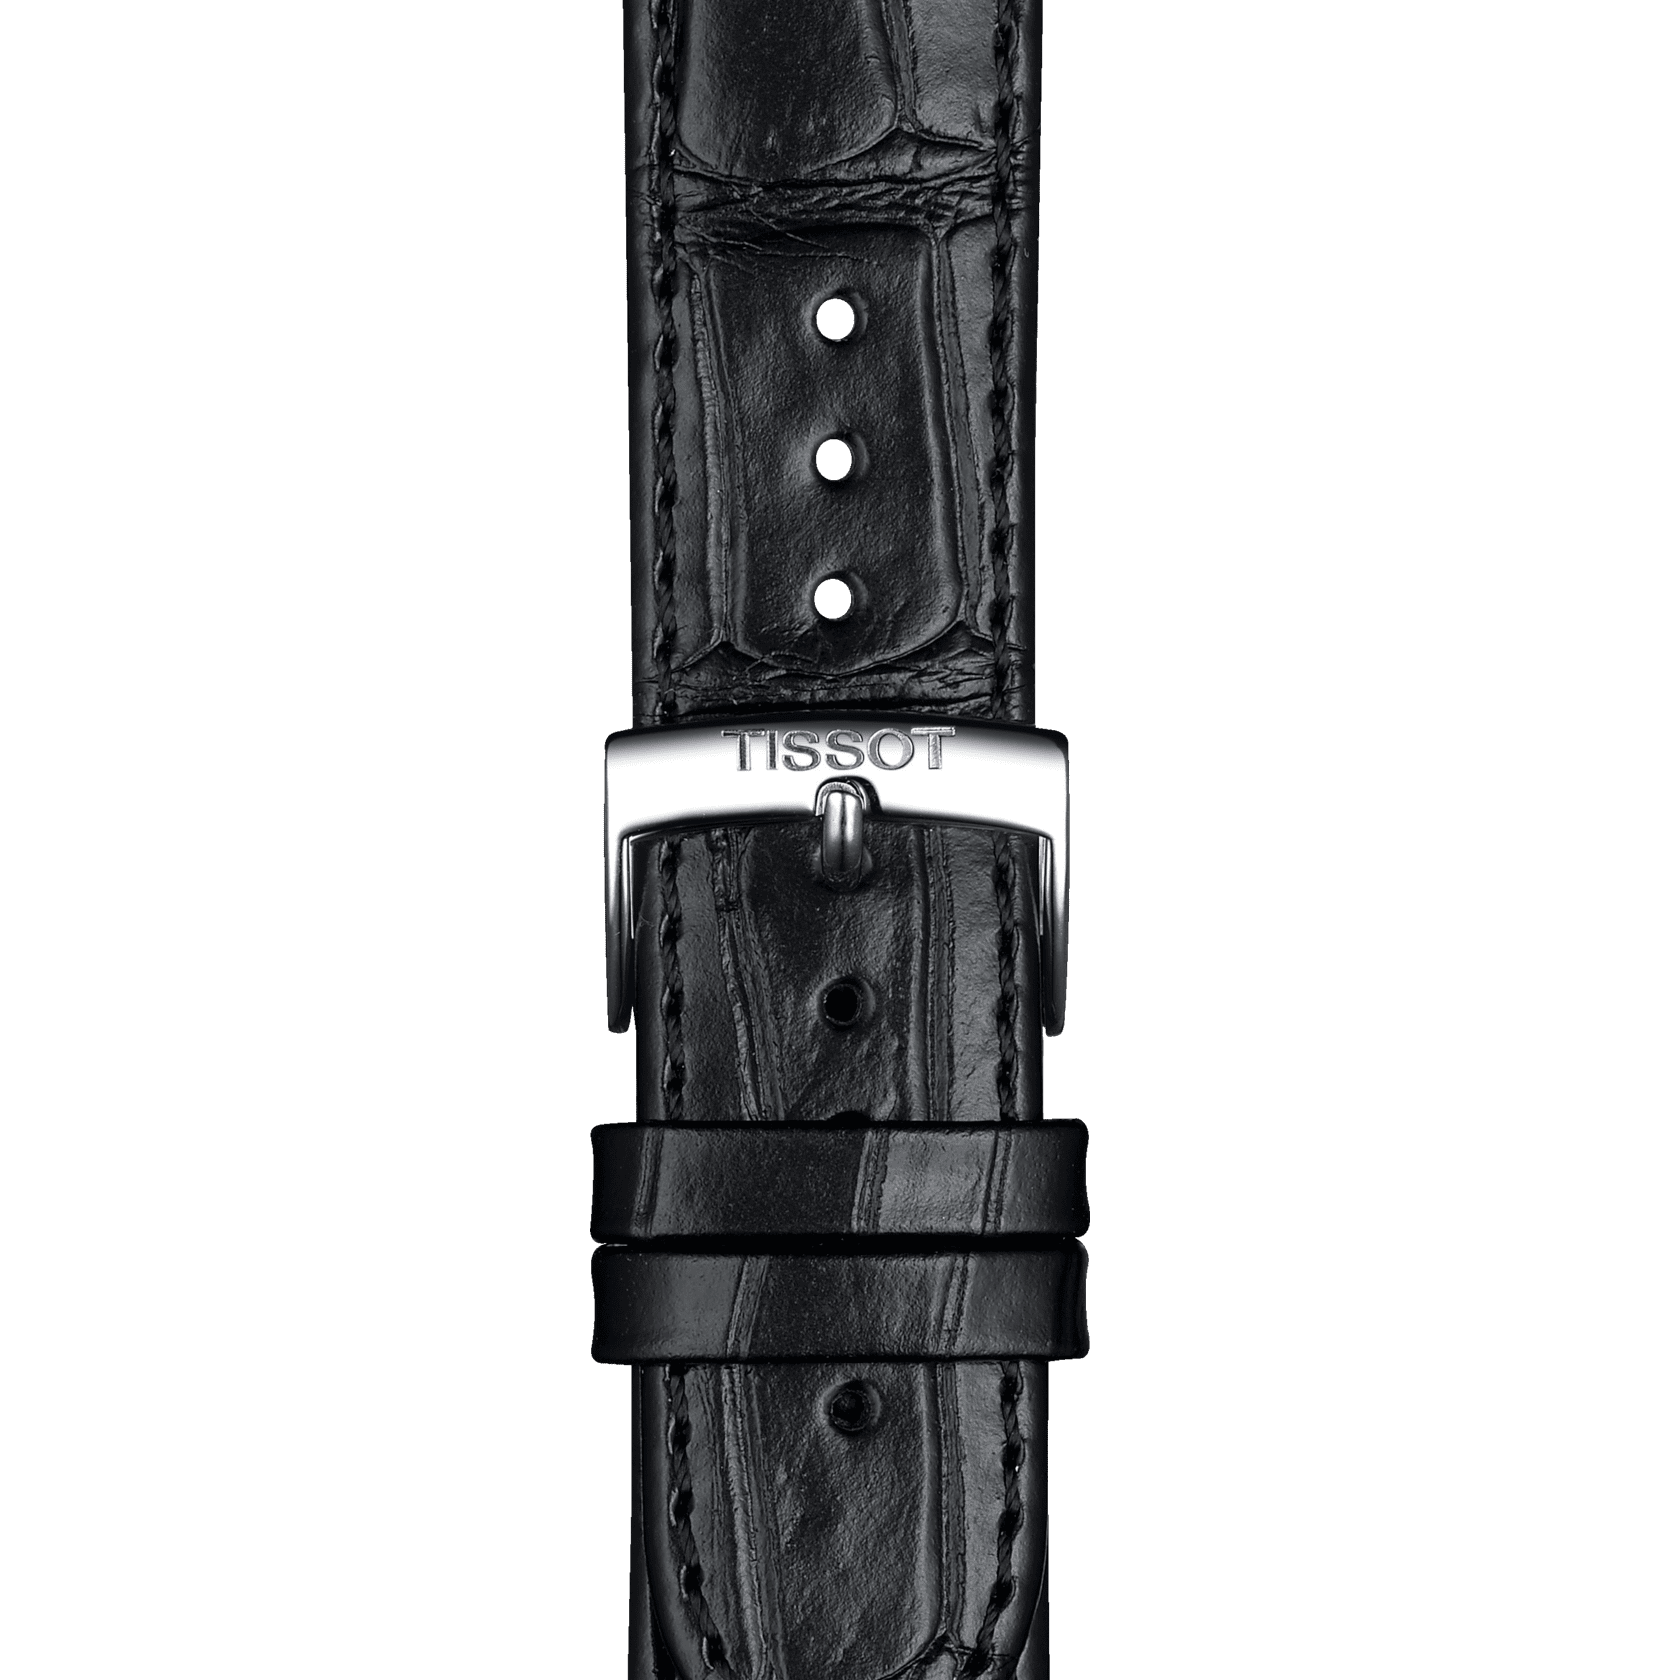 Tissot official black leather strap lugs 20 mm